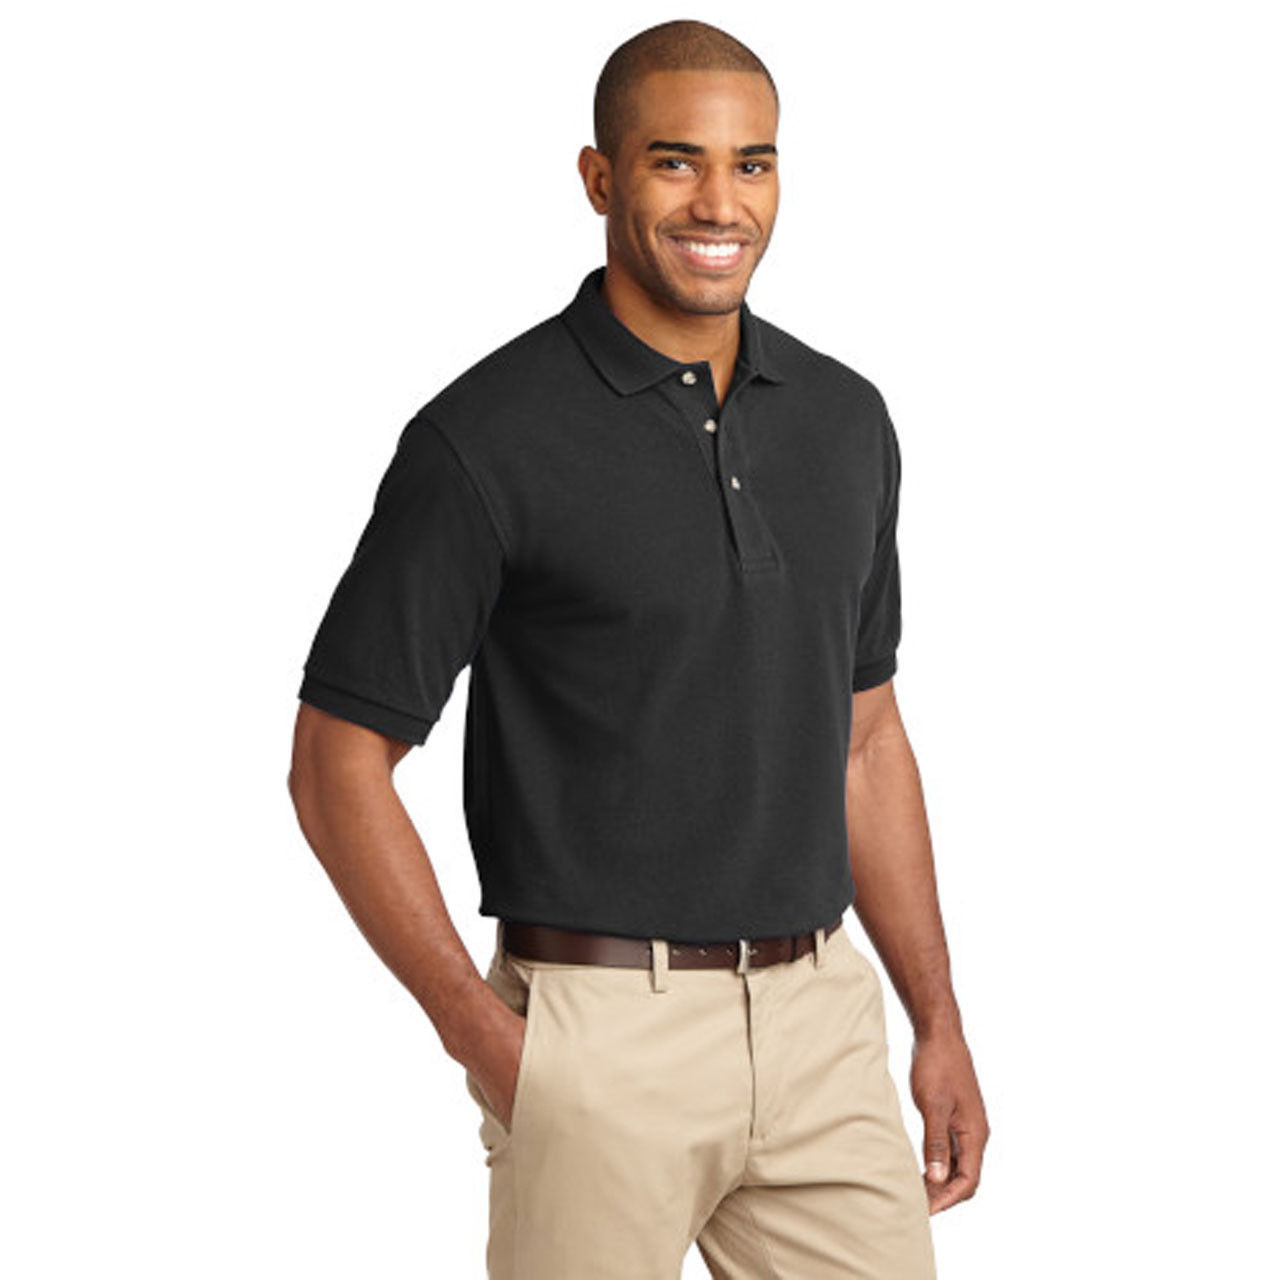 Does the bulk wholesale summer green lapel polo short shirt have side vents?